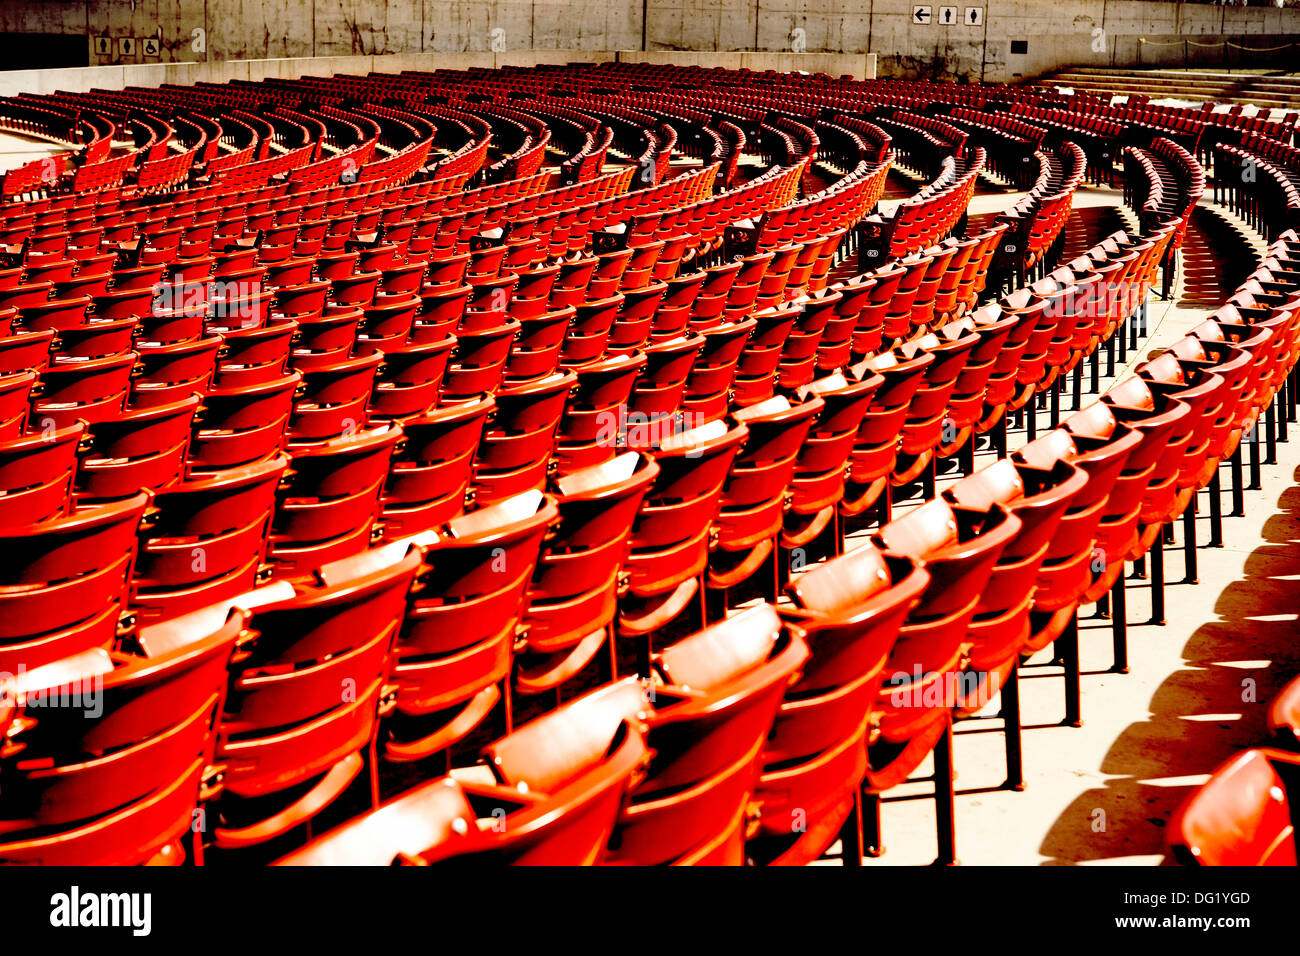 Red Outdoor Theater Seating, Jay Pritzker Pavilion, Millennium Park, Chicago, Illinois, USA Stock Photo